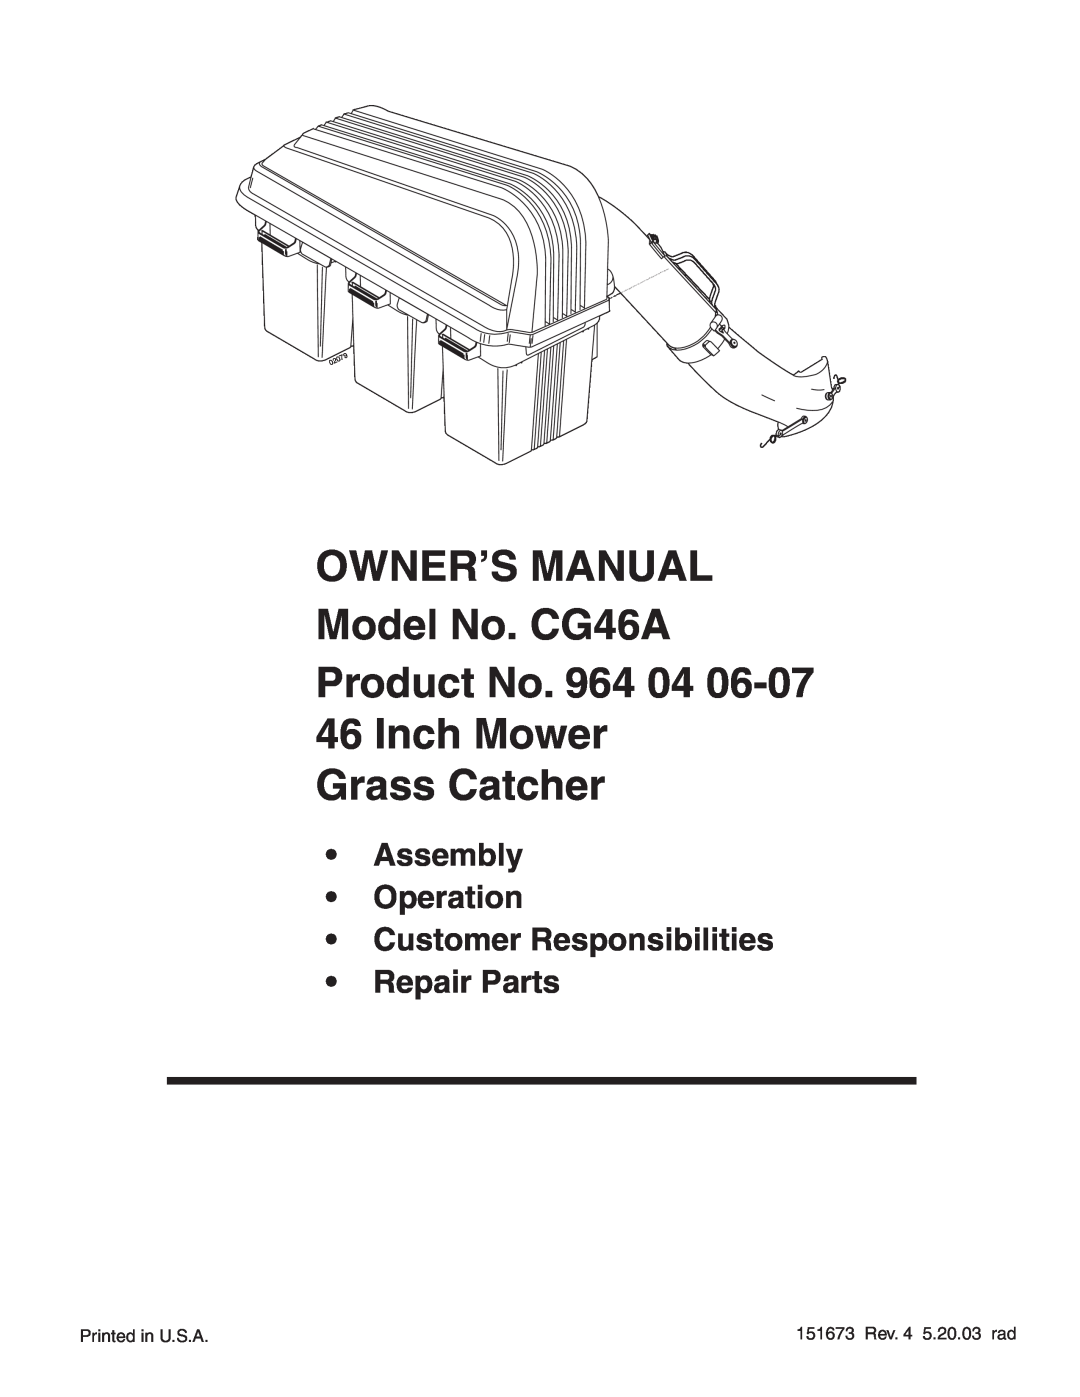 Poulan 964 04 06-07 owner manual Inch Mower Grass Catcher, Assembly Operation Customer Responsibilities, Repair Parts 